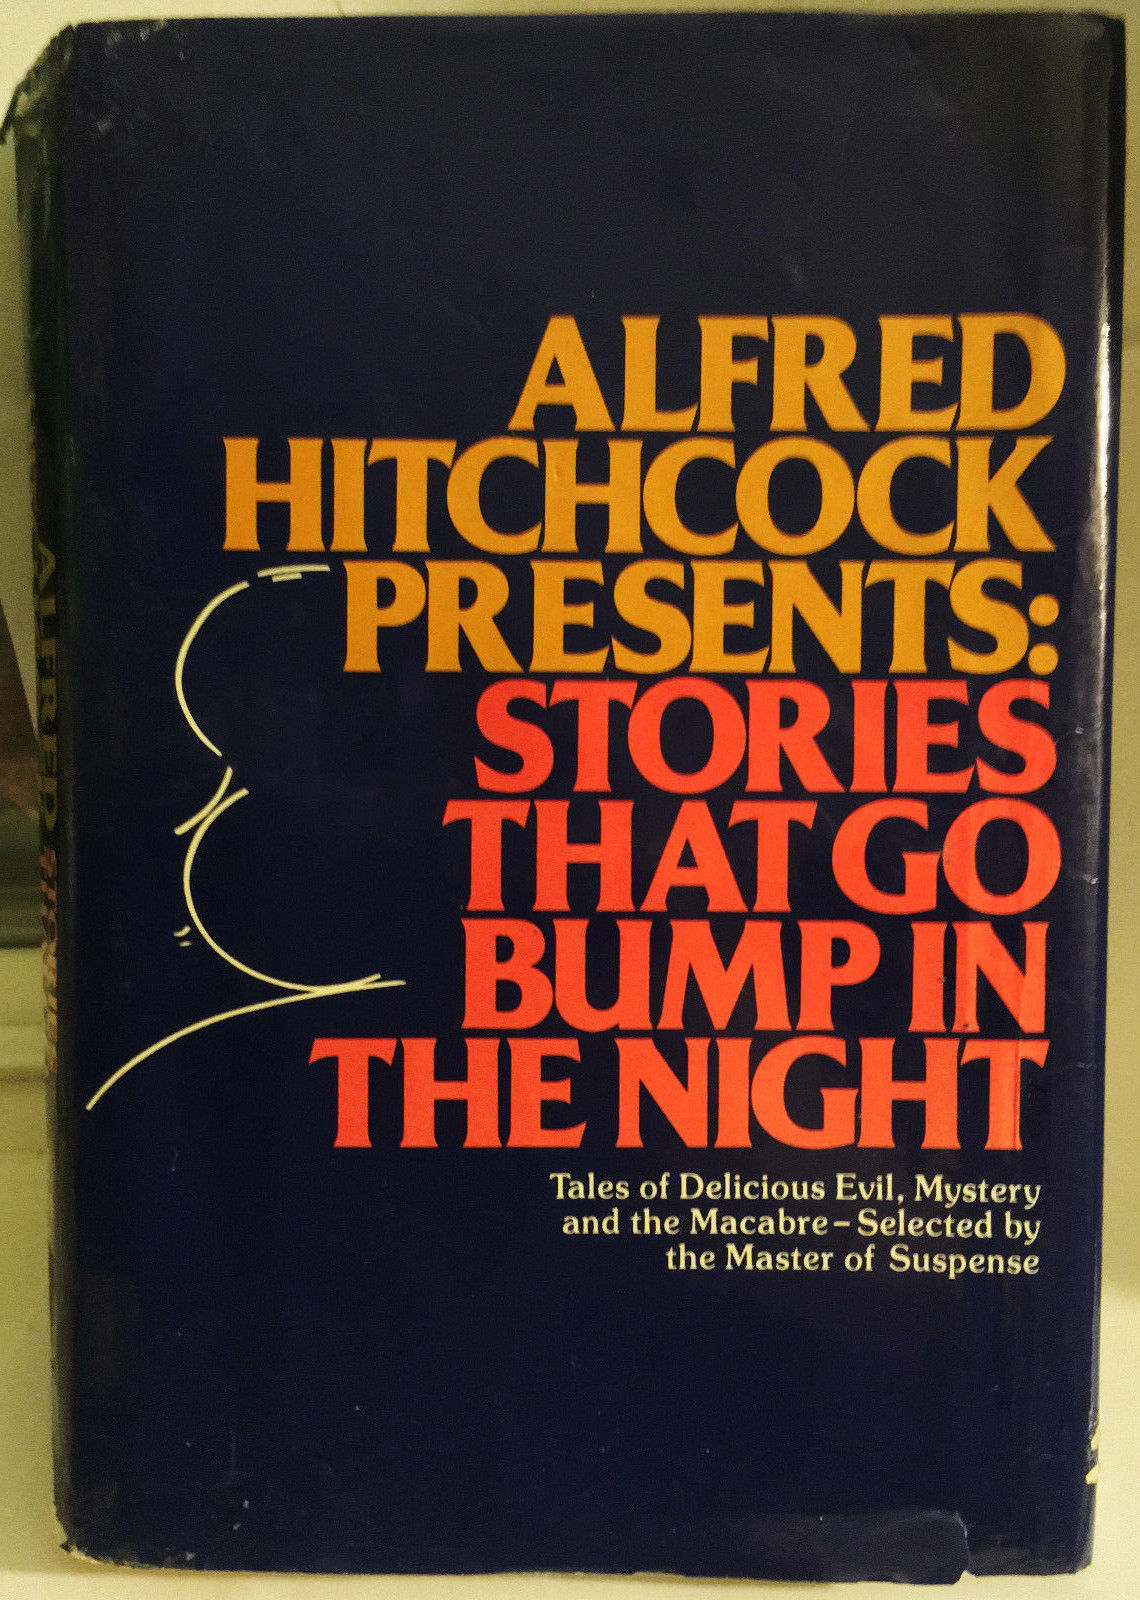 Alfred Hitchcock presents magazine reviews